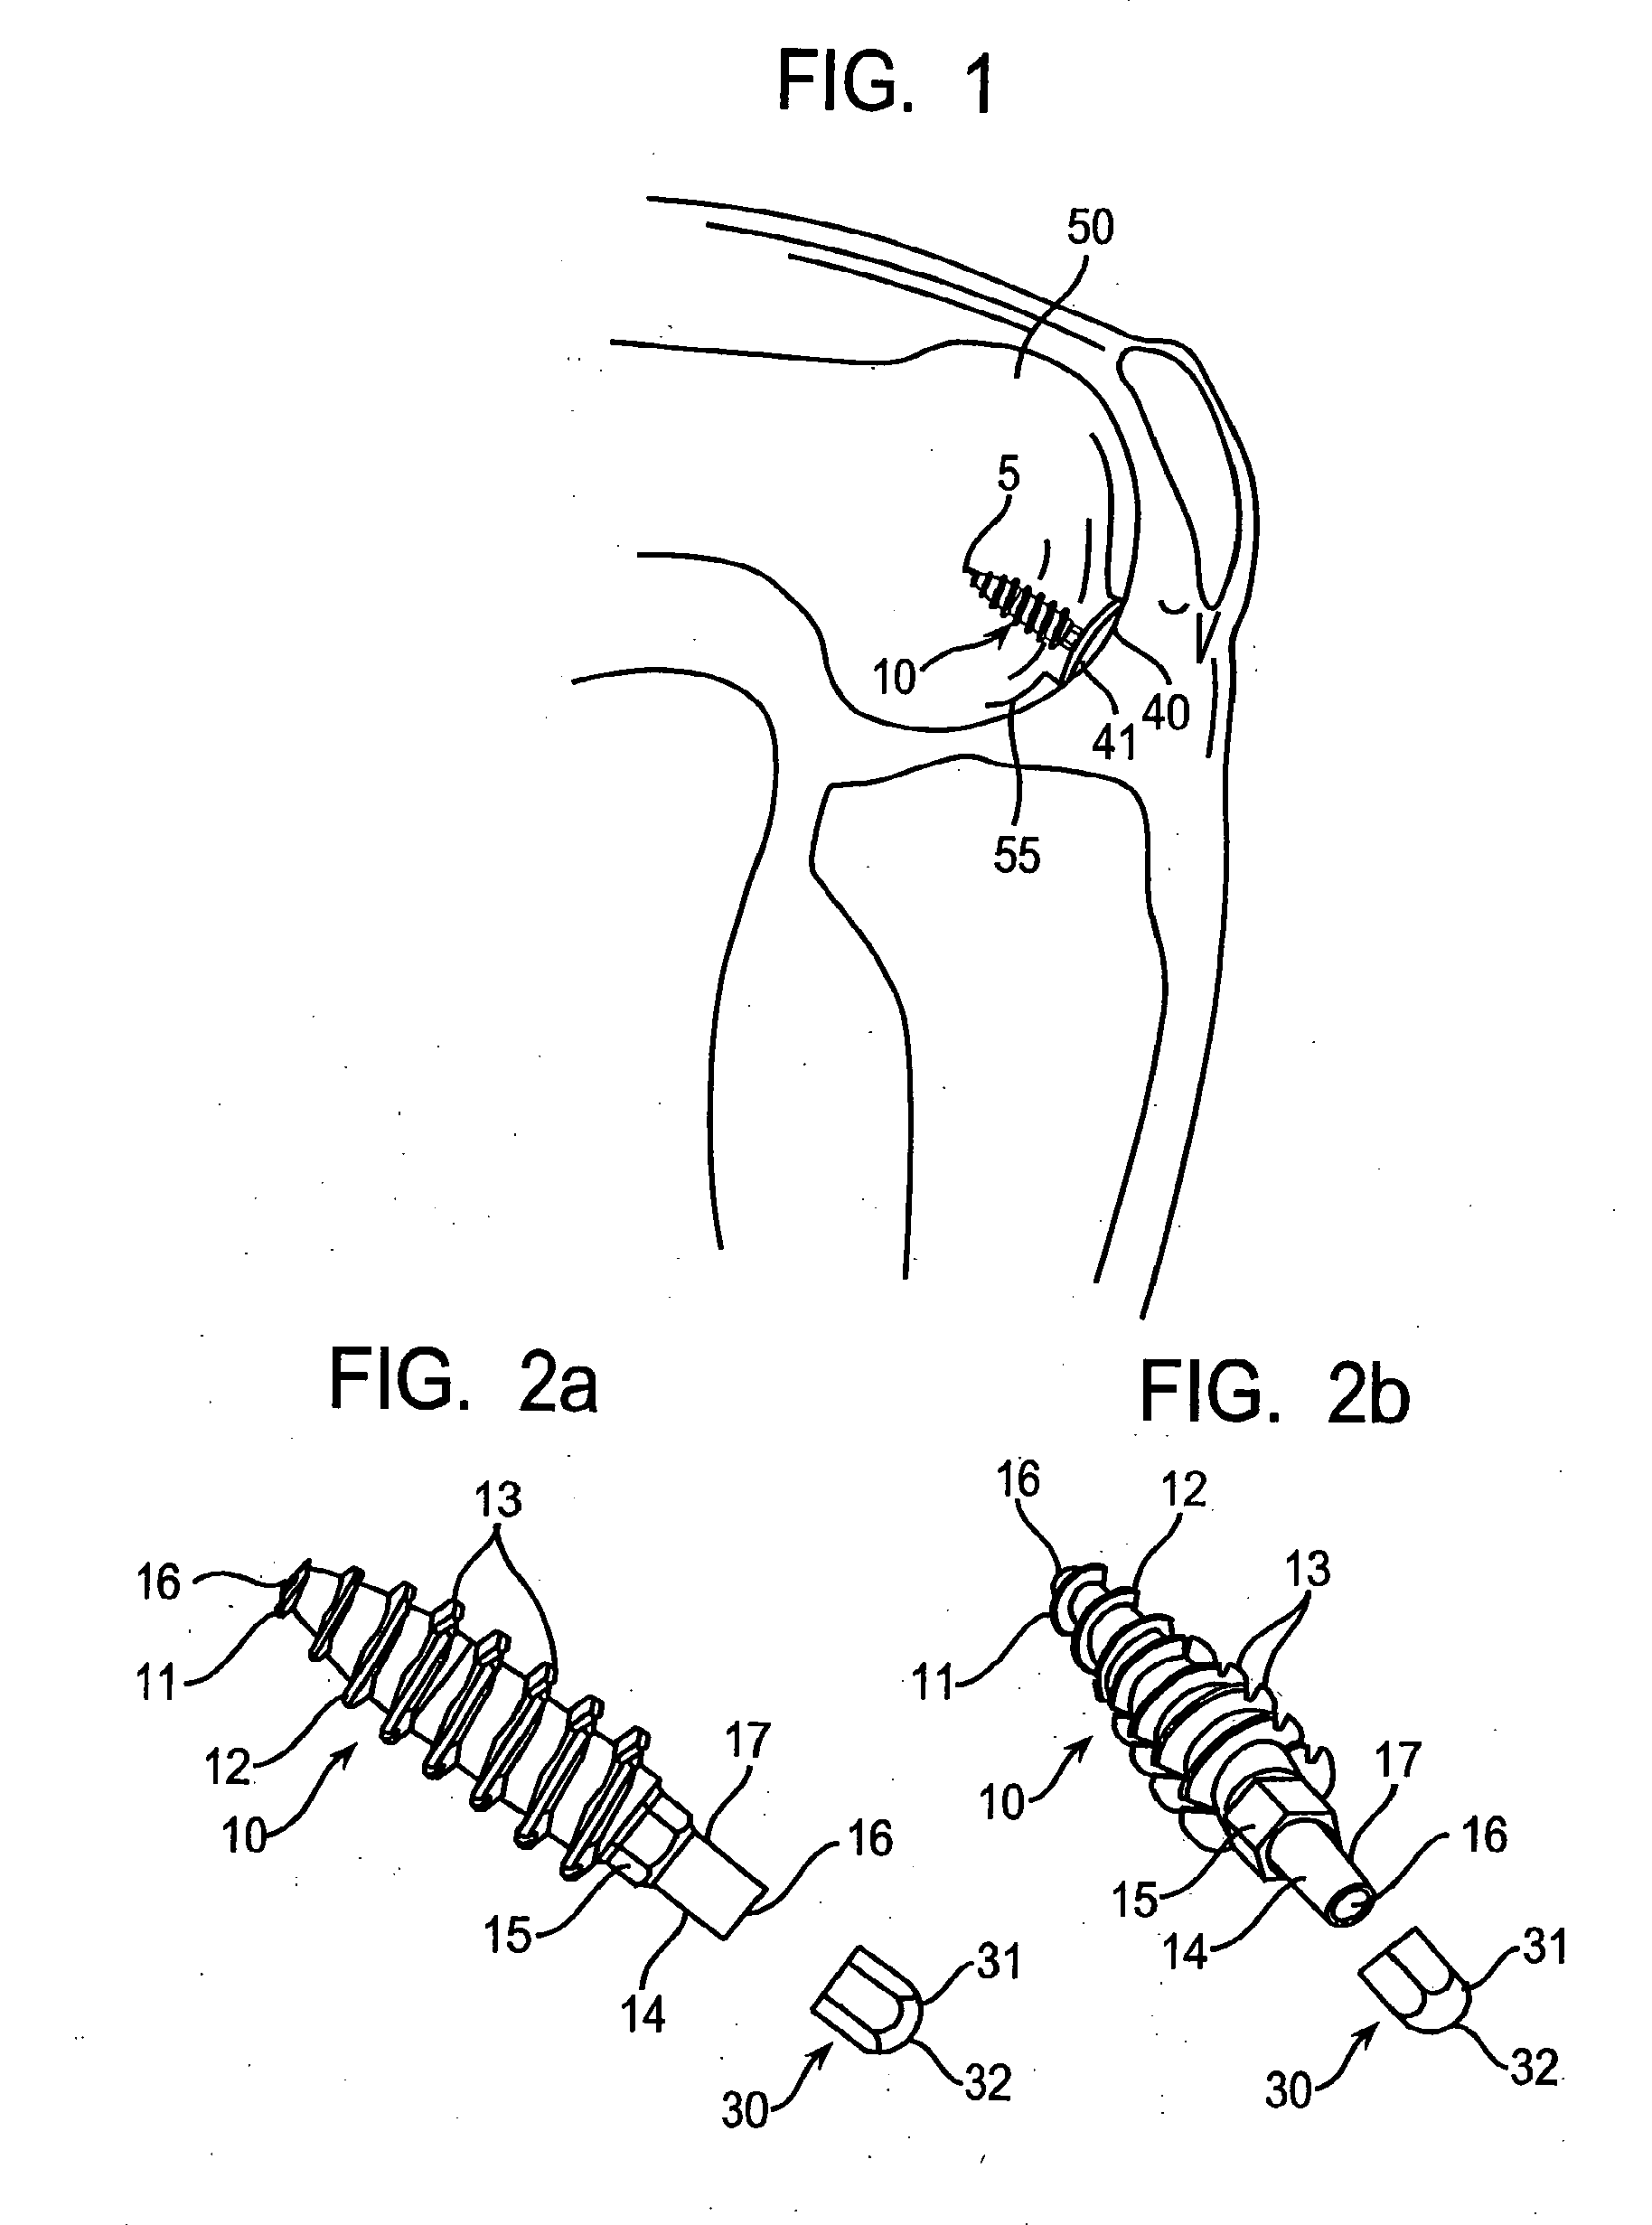 System and Method for Joint Resurface Repair